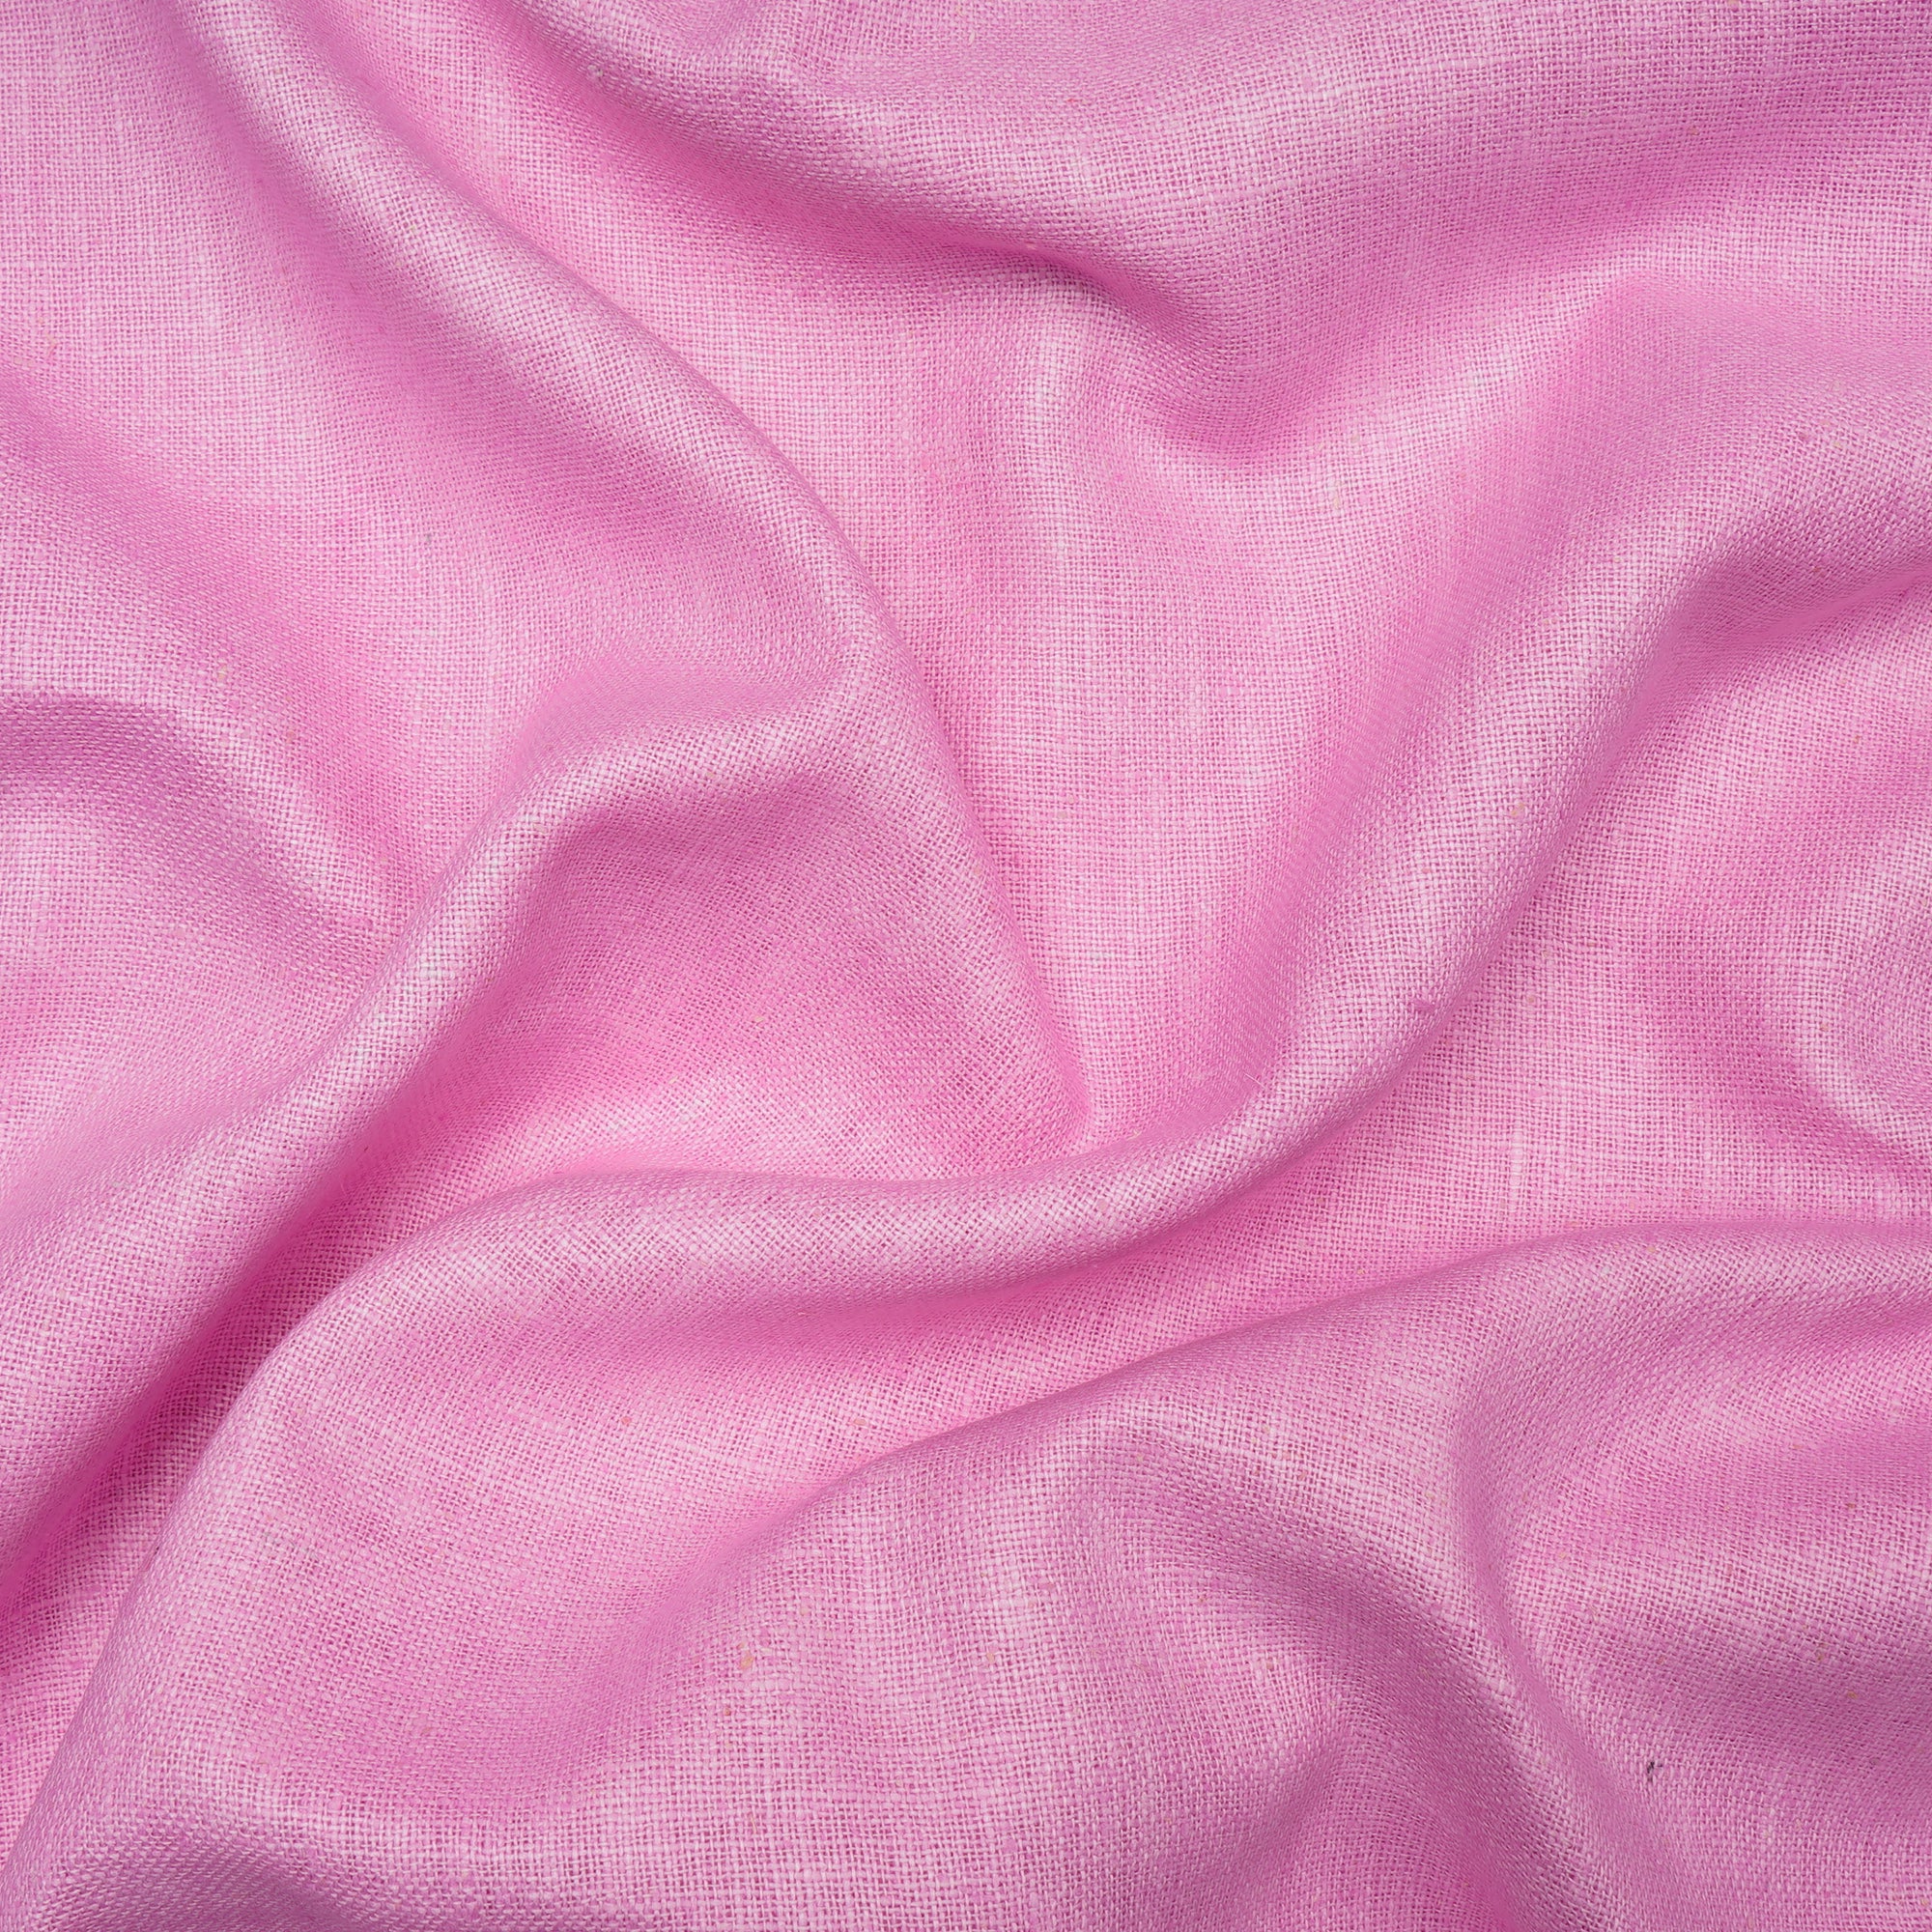 Ultra Pink Color Matka Noile Silk Fabric